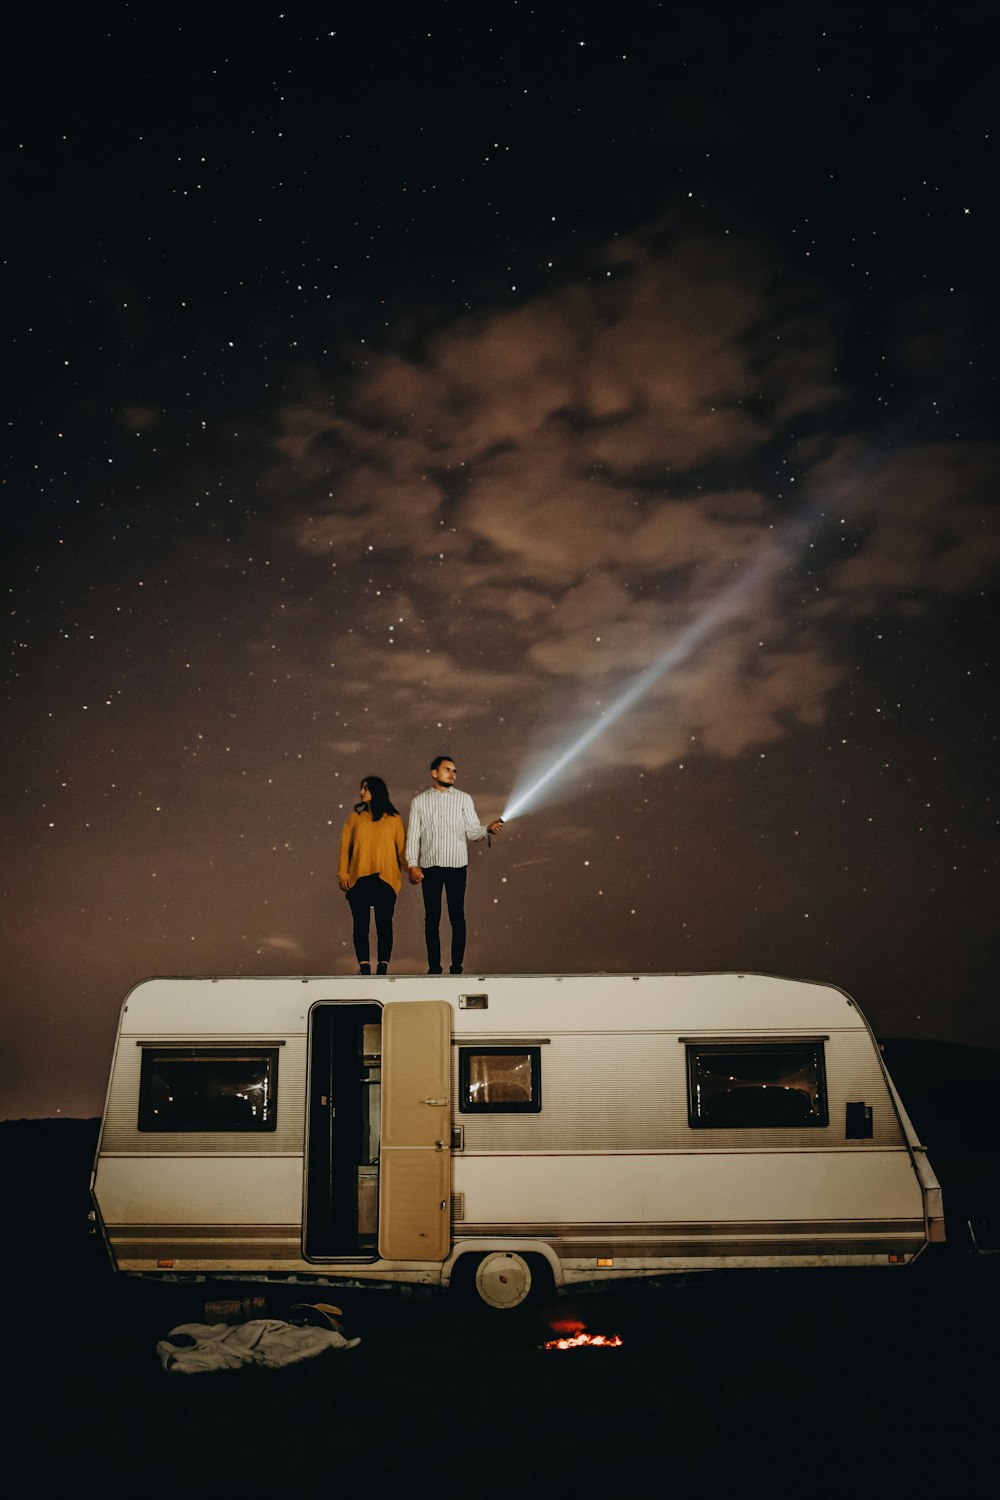 two people standing on top of a trailer under a night sky